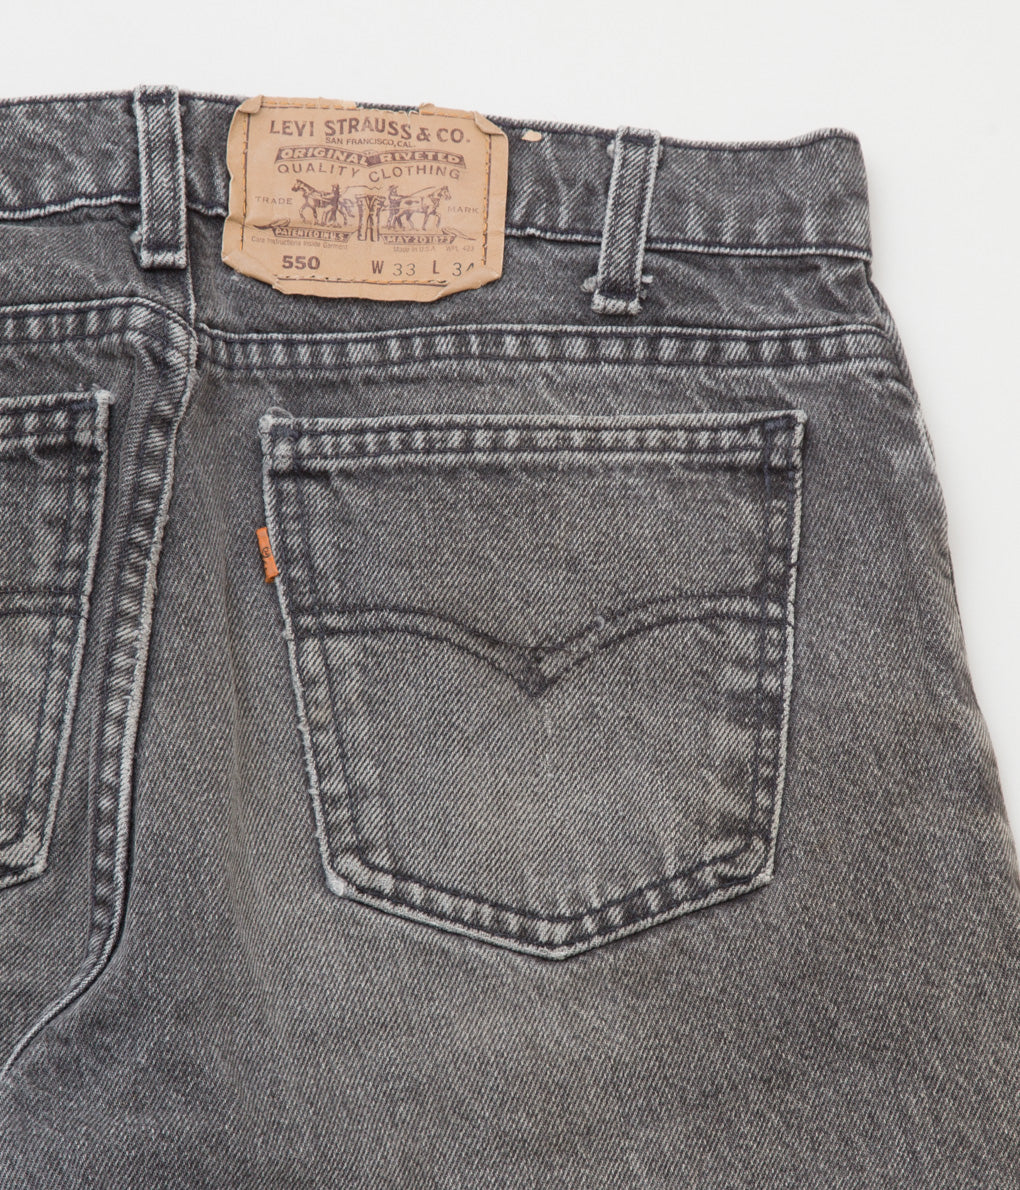 VINTAGE "90's LEVI‘S 550 BLACK MADE IN USA "(W33/L32)